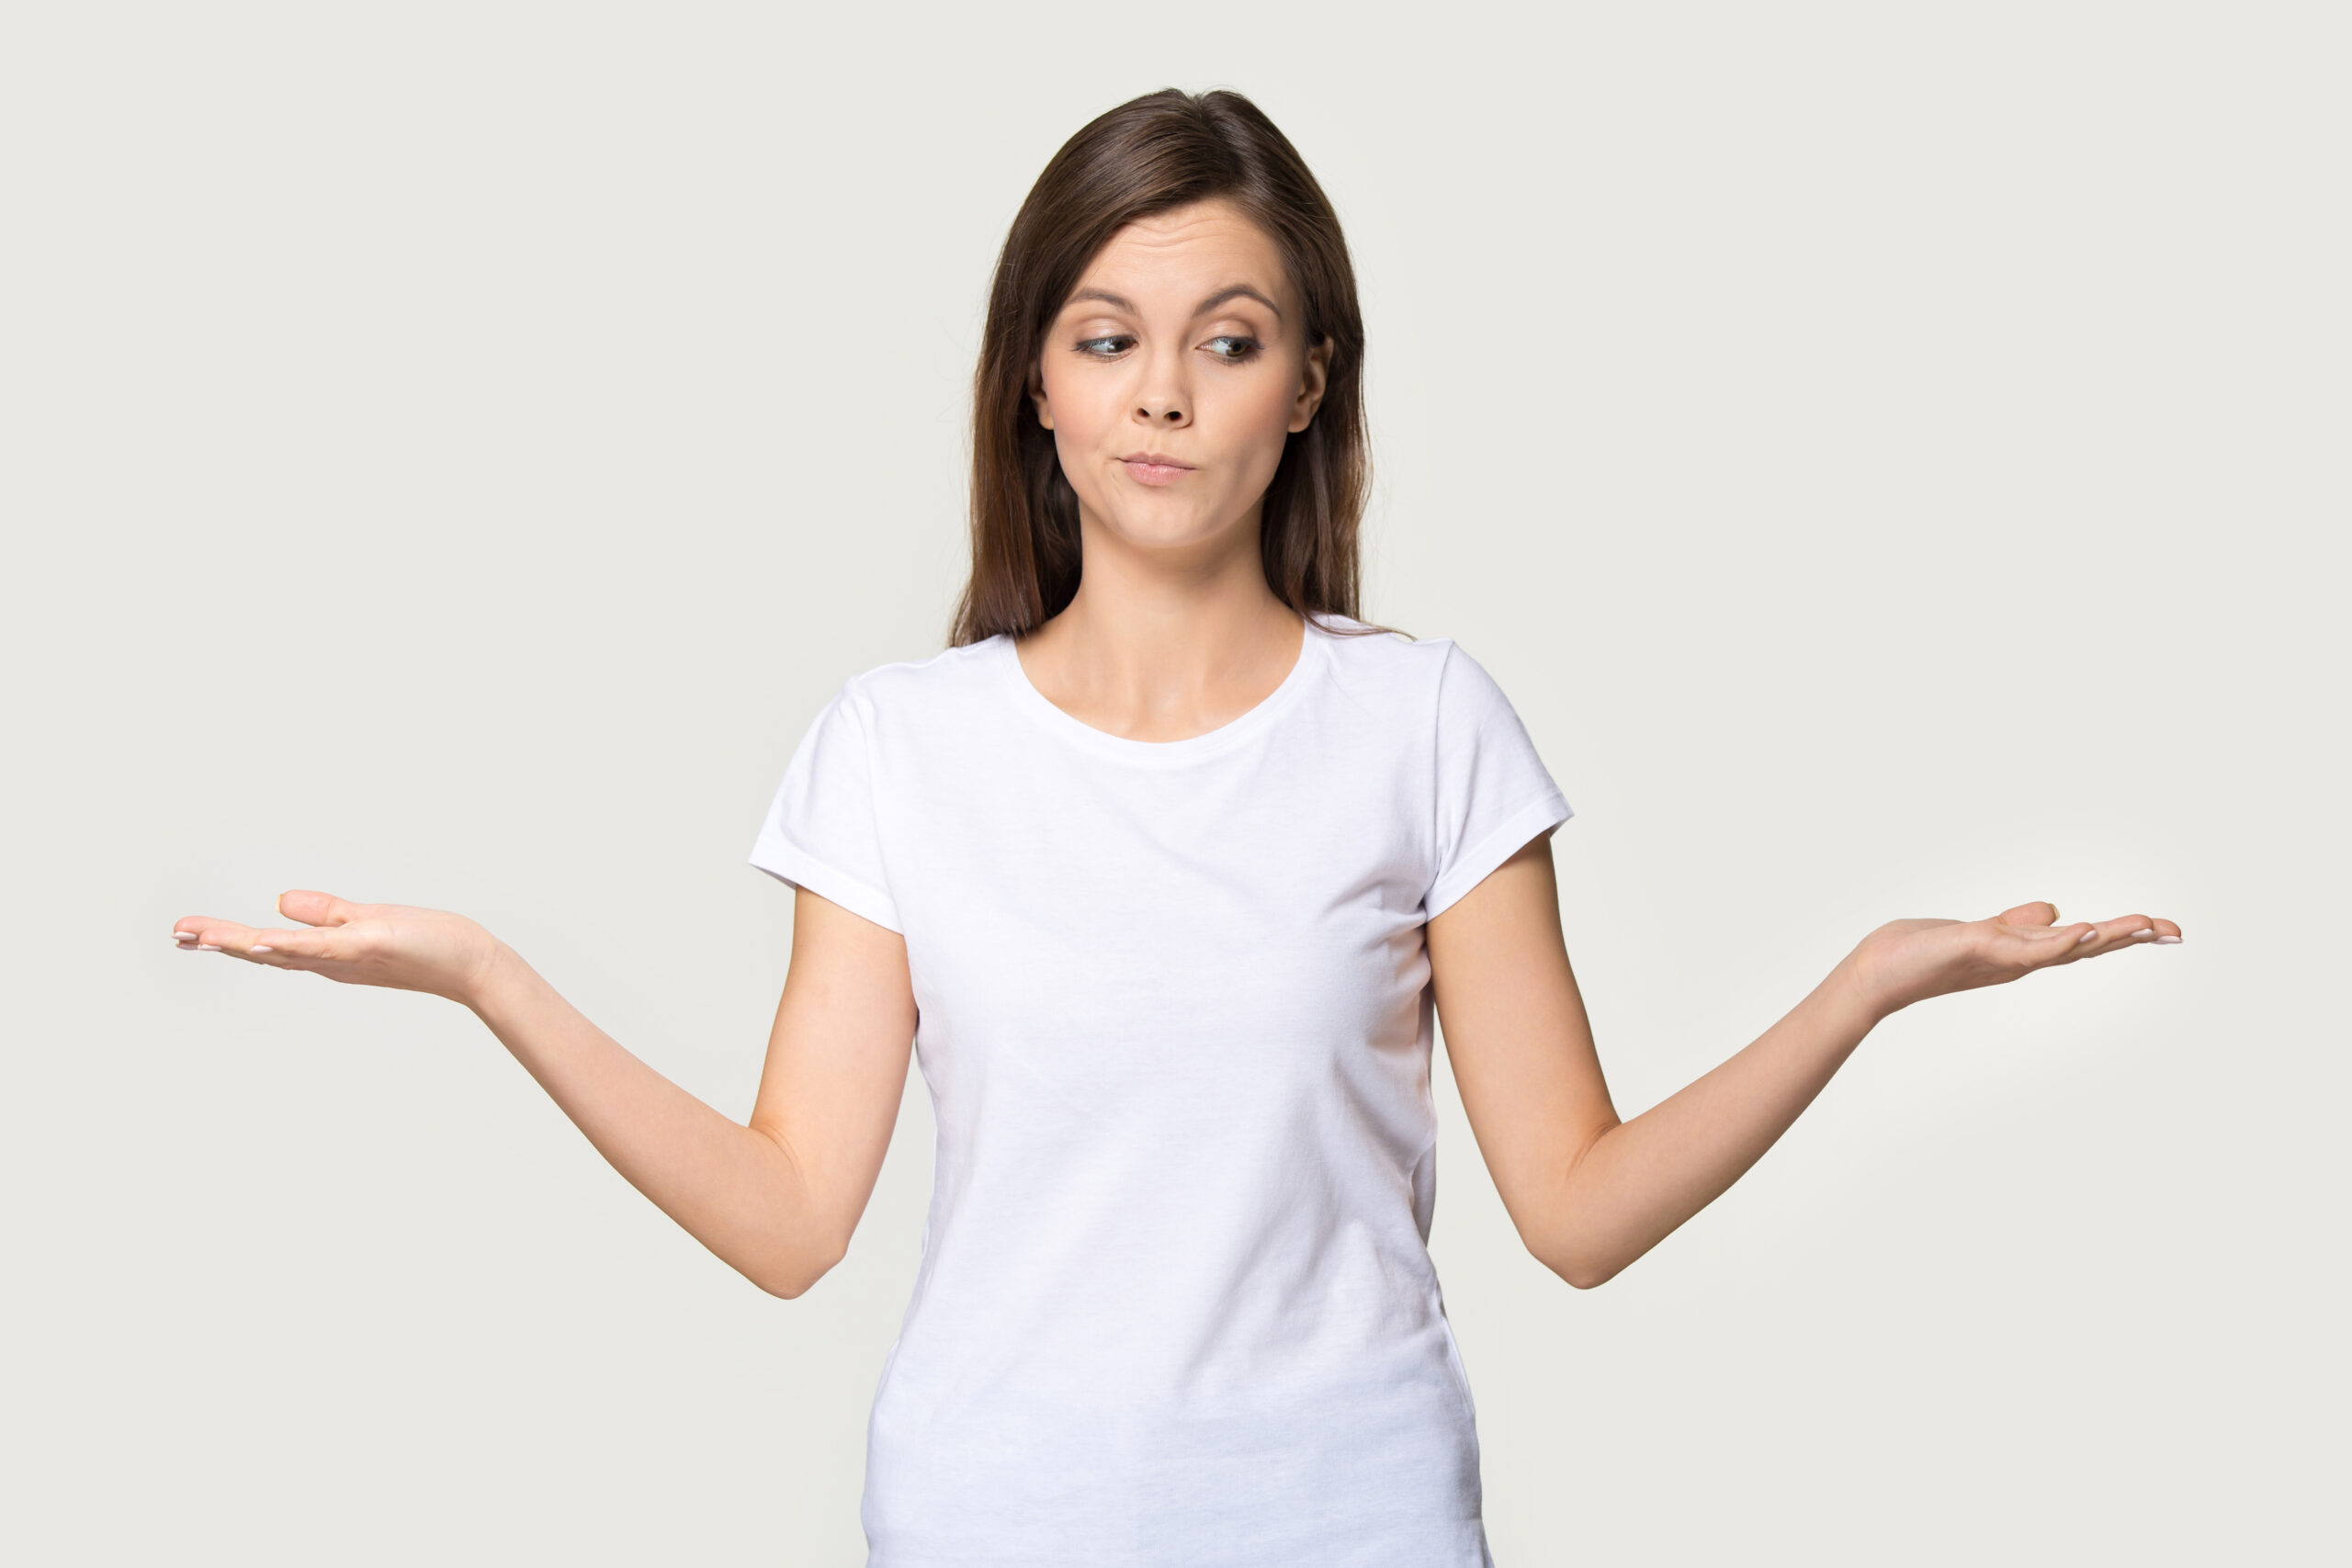 Young woman wearing white t-shirt with her hands up on each side, implying a choice she has to make.